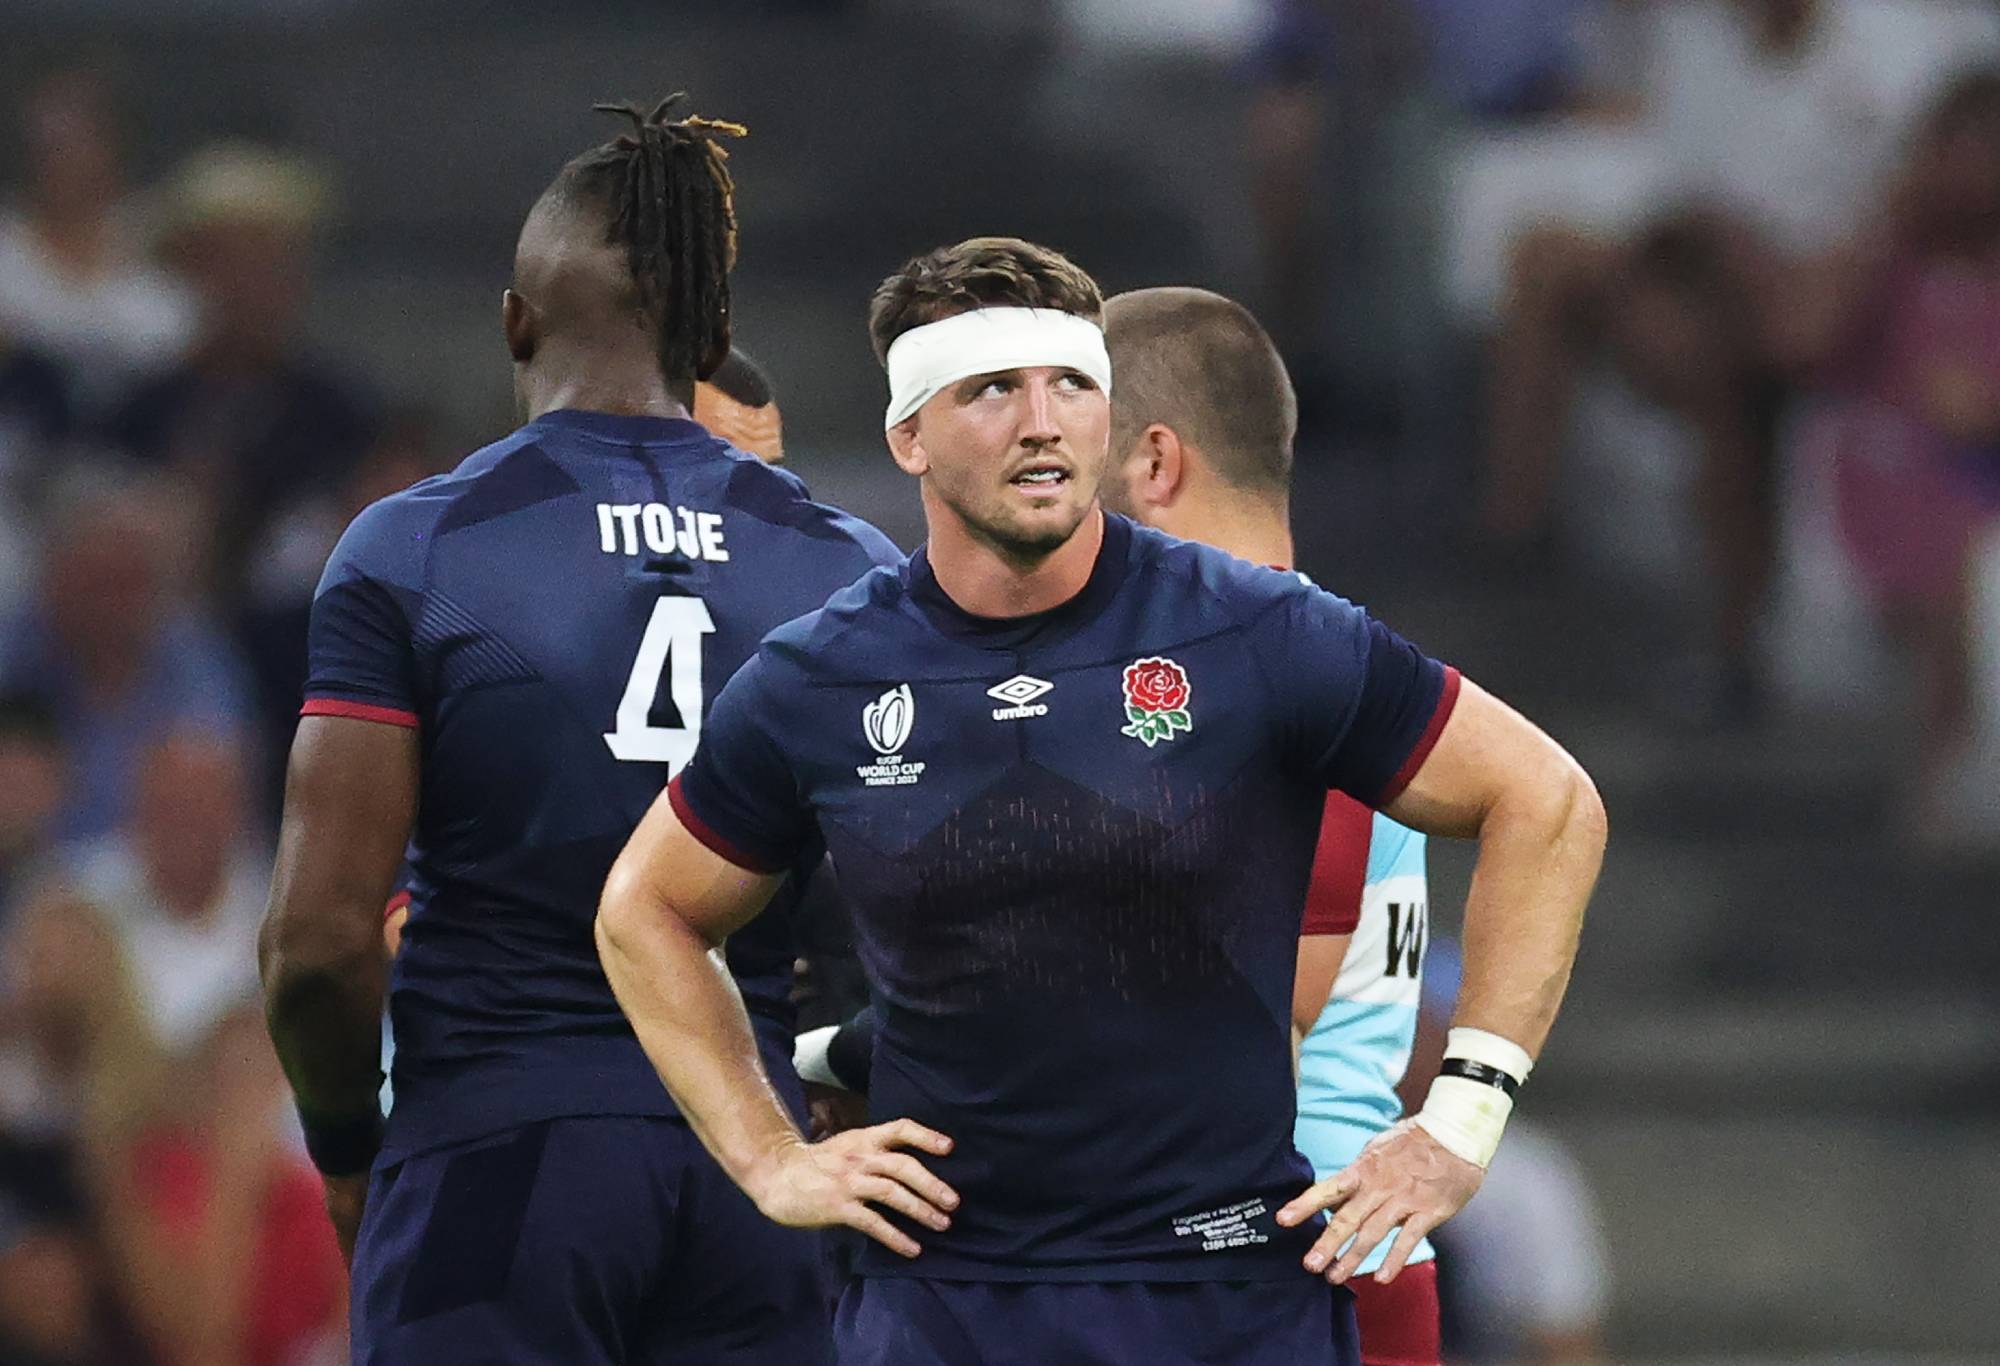 Tom Curry of England looks dejected as he leaves the pitch after receiving a yellow card from referee Mathieu Roger Jean Raynal (not pictured) as the 8 minute window for a TMO bunker review begins after a clash with Juan Cruz Mallia of Argentina (not pictured) collided during the Rugby World Cup France 2023 match between England and Argentina at Stade Velodrome on September 09, 2023 in Marseille, France. (Photo by David Rogers/Getty Images)